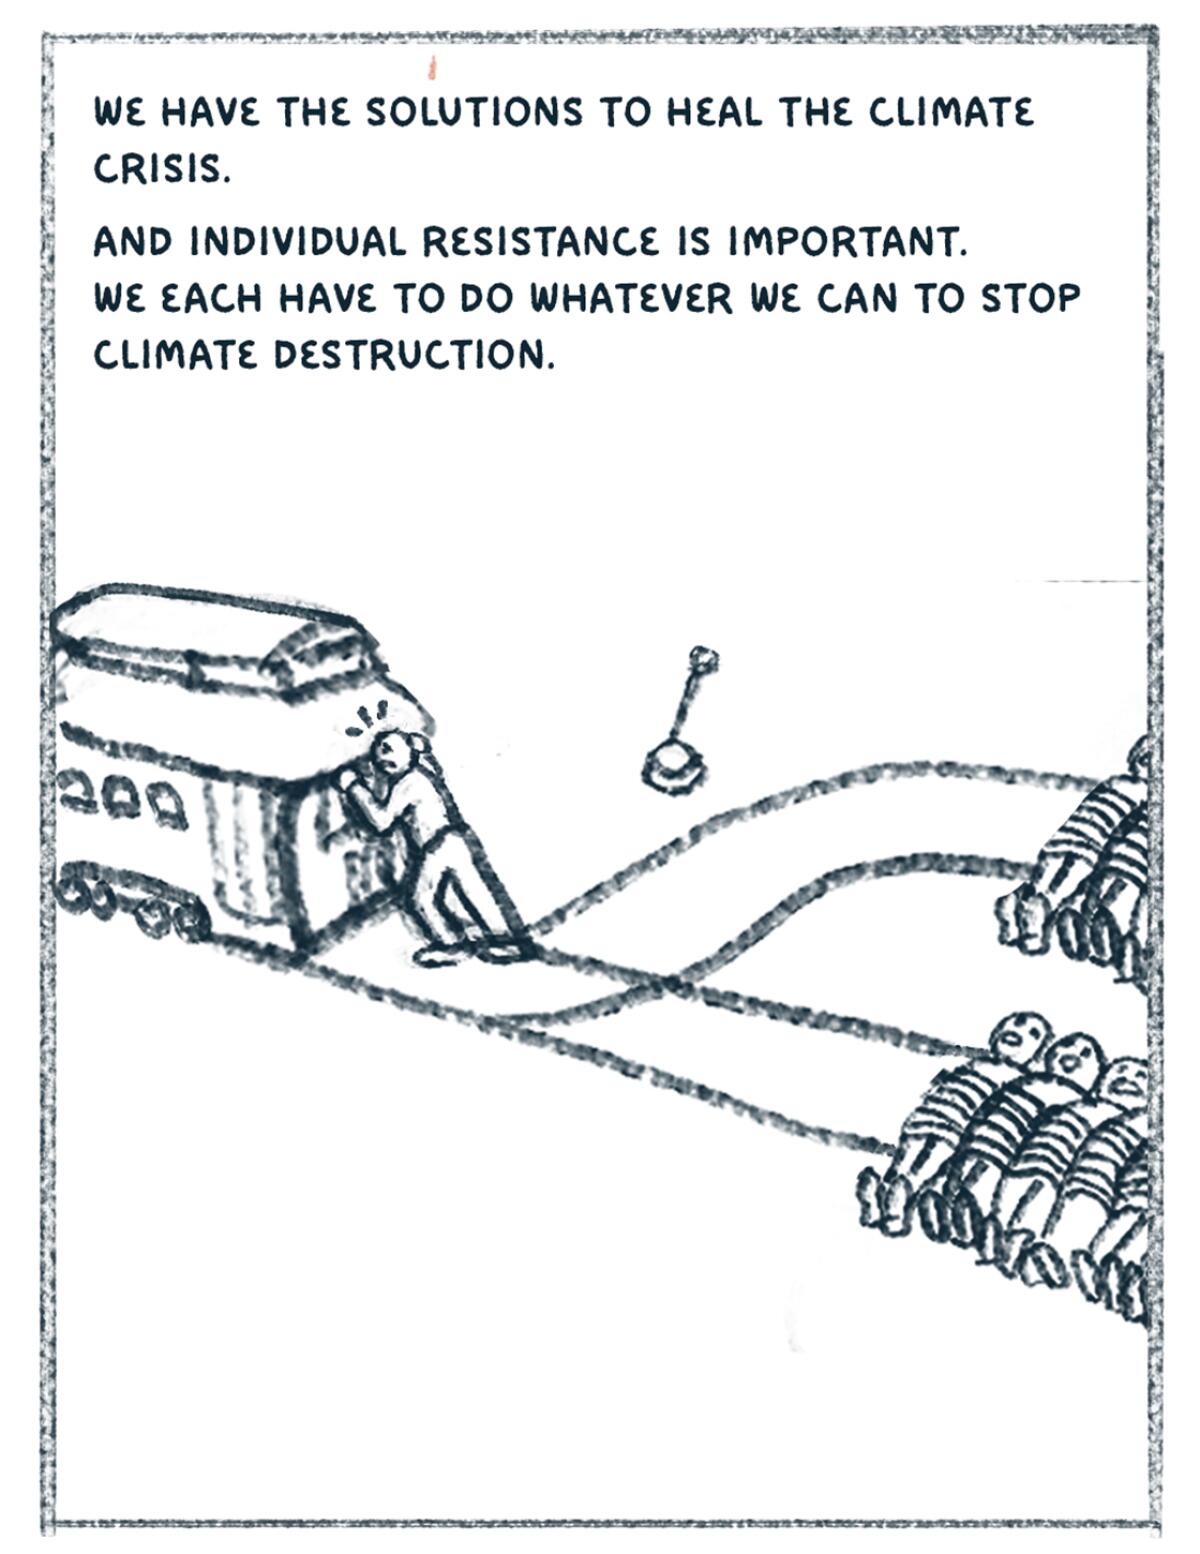 Illustration of recurring train photo with people tied to tracks. A person is trying to push the train back up the tracks. 